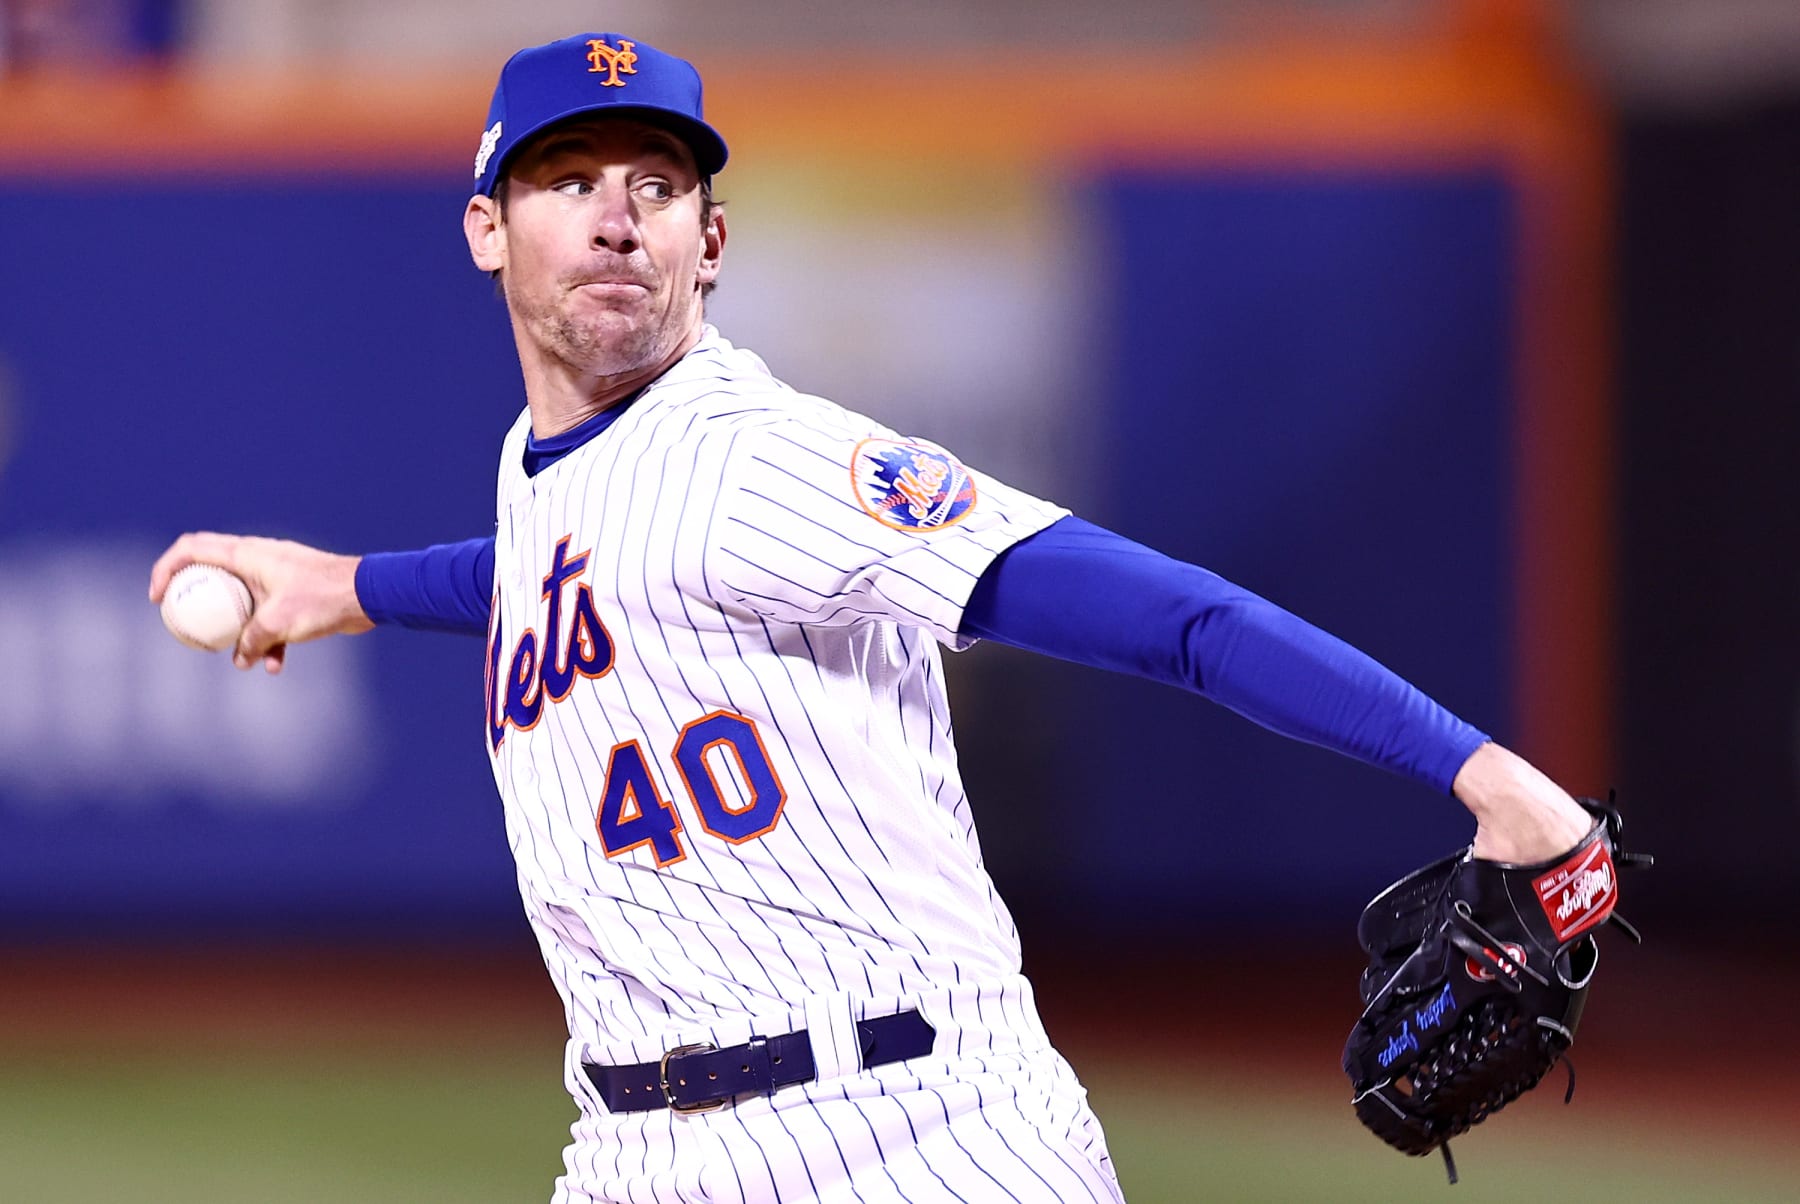 Jacob deGrom Returns for Mets and Corey Kluber Exits for Yankees